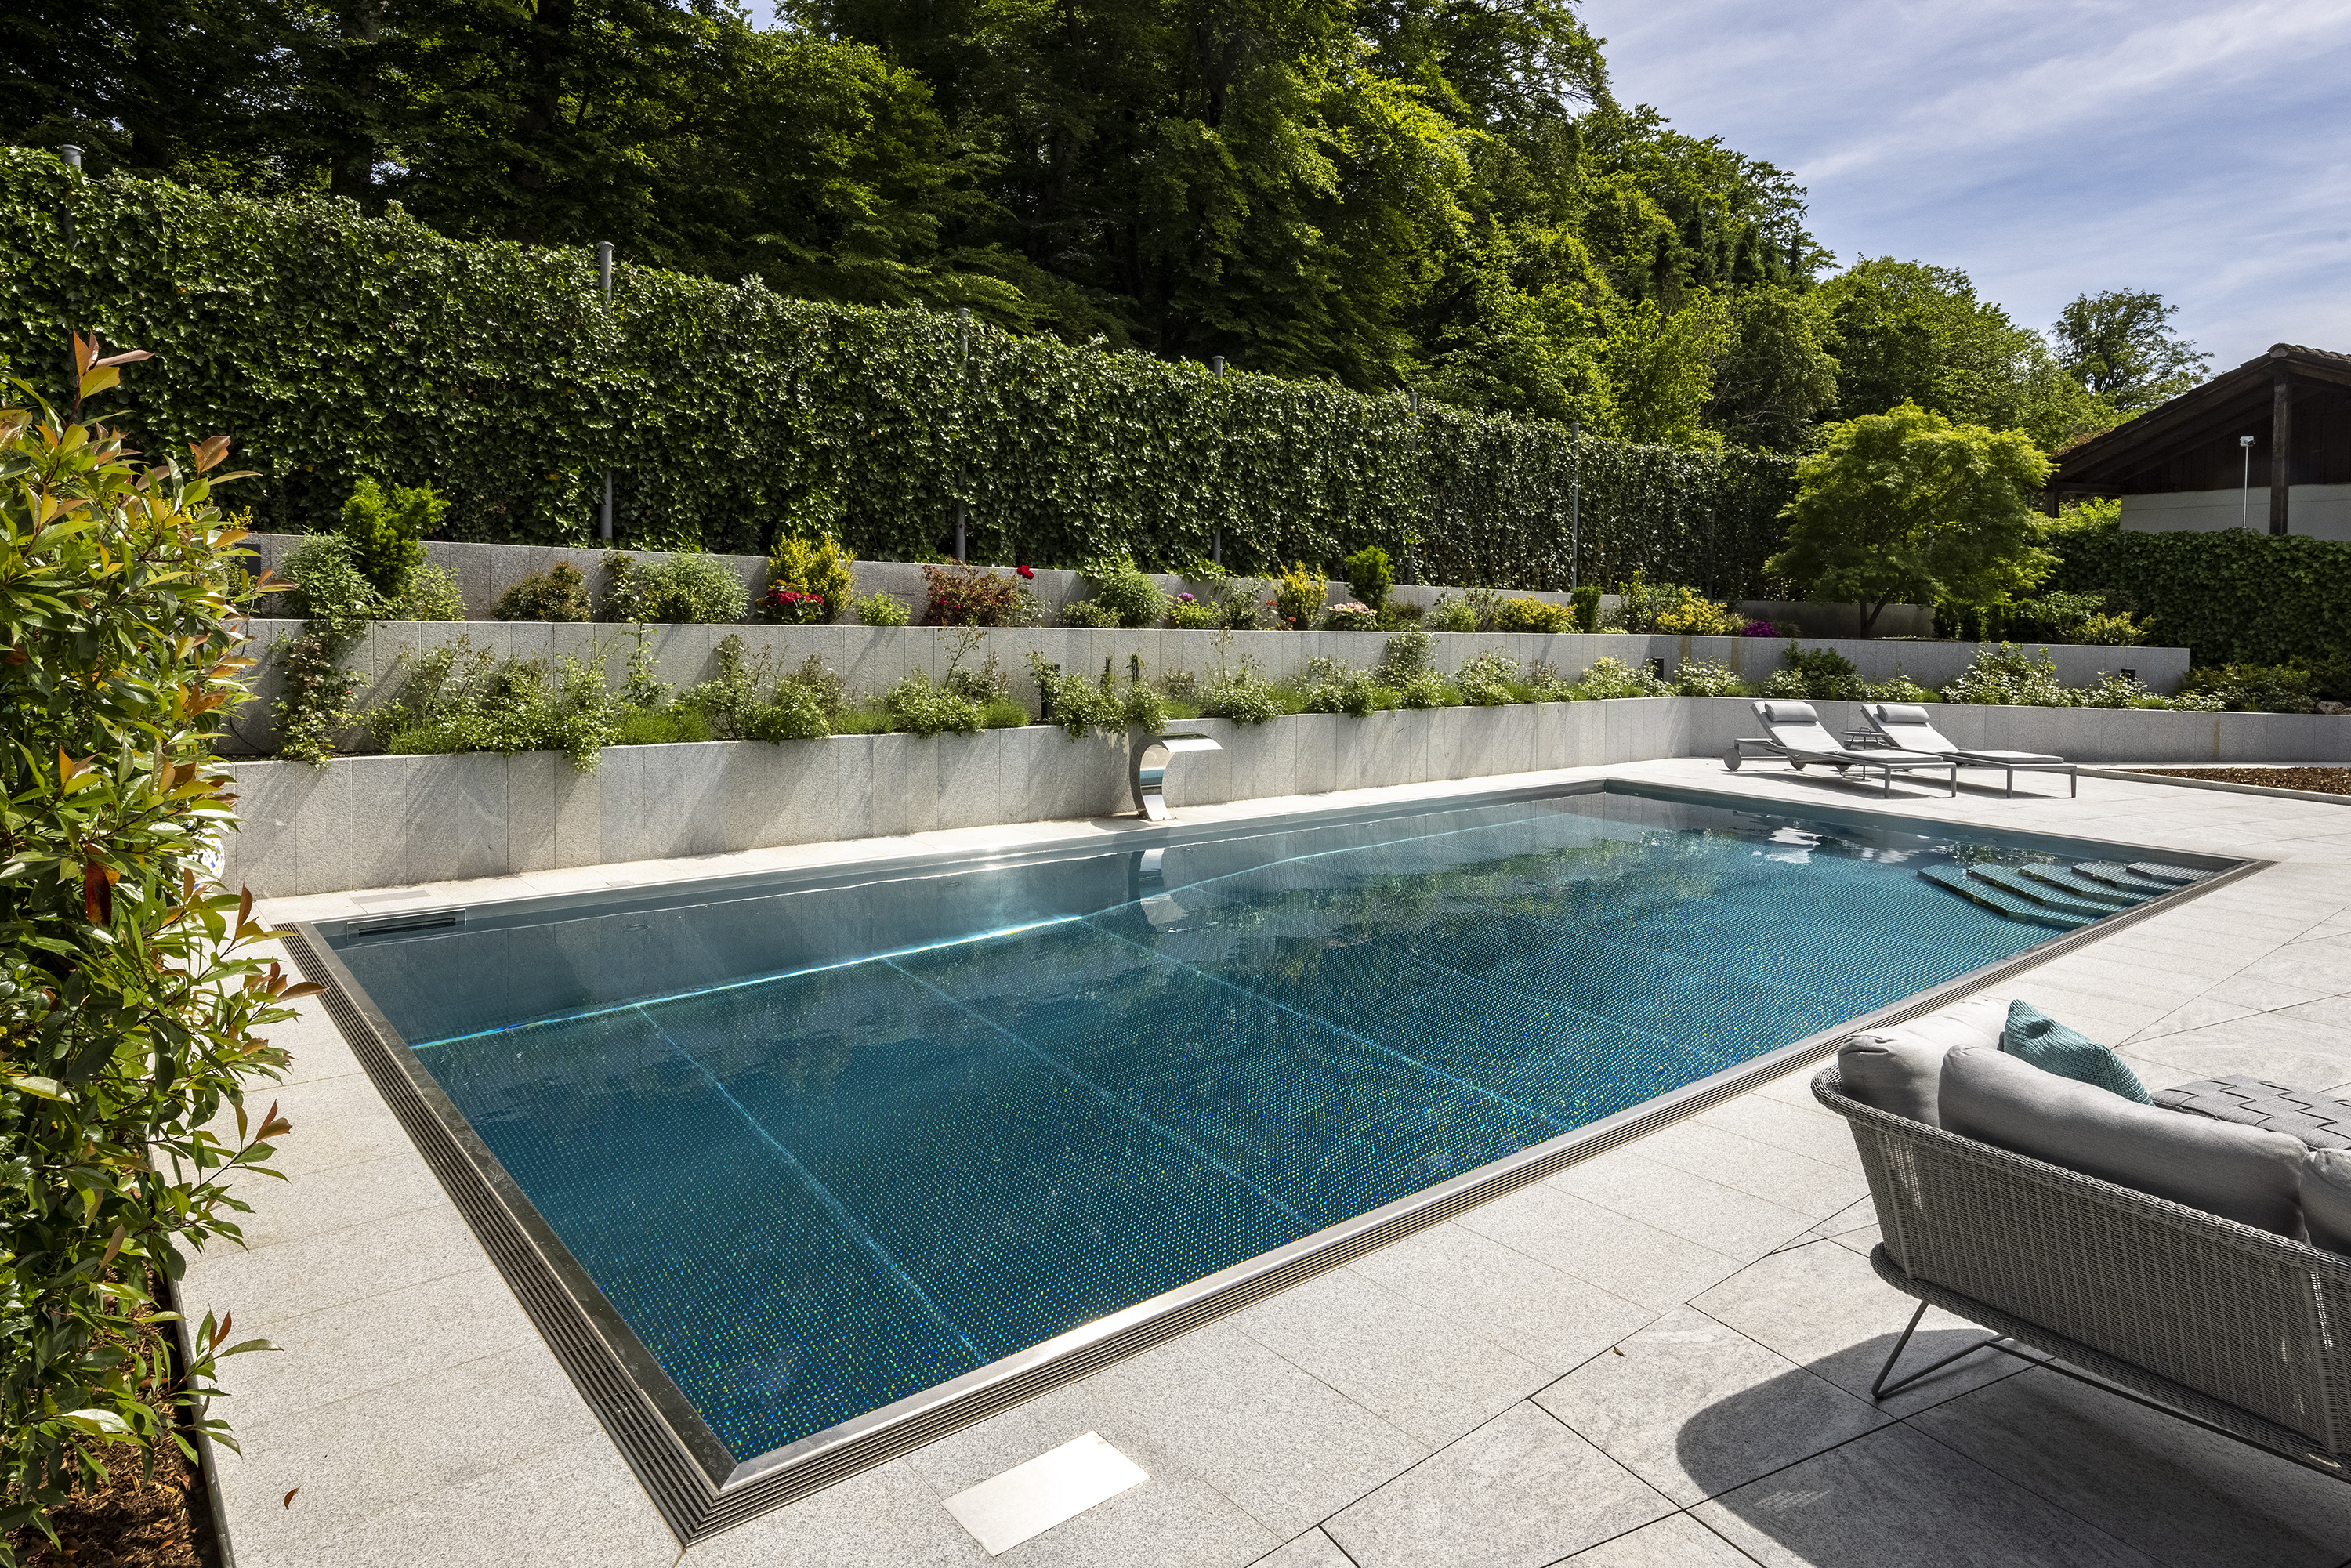 Stainless steel pool with a lowered bottom suitable for demanding swimmers